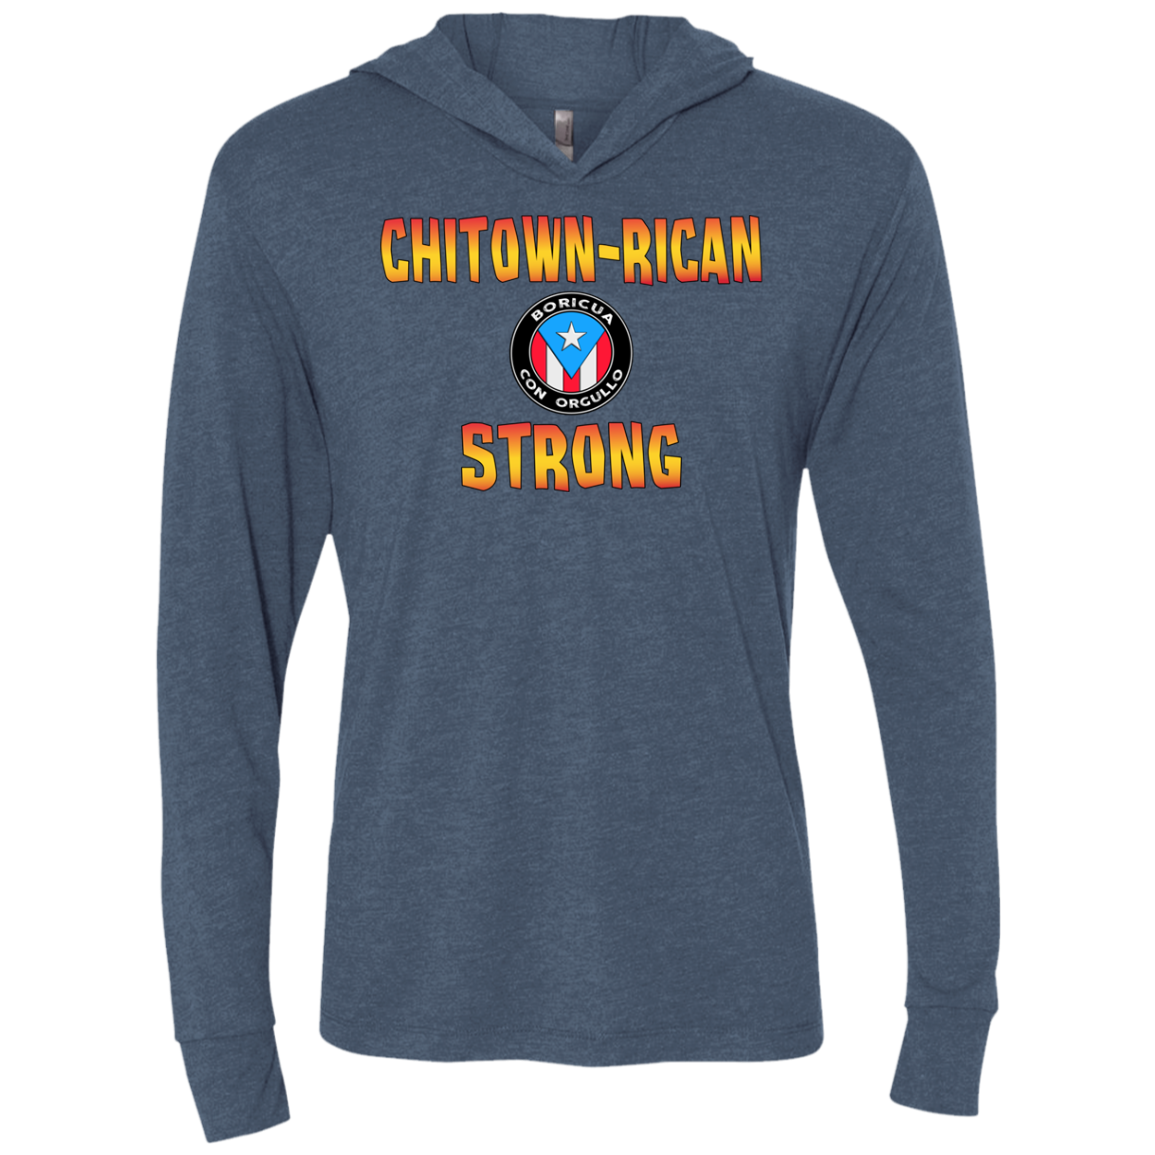 Chitown Rican Strong Unisex Triblend LS Hooded T-Shirt - Puerto Rican Pride